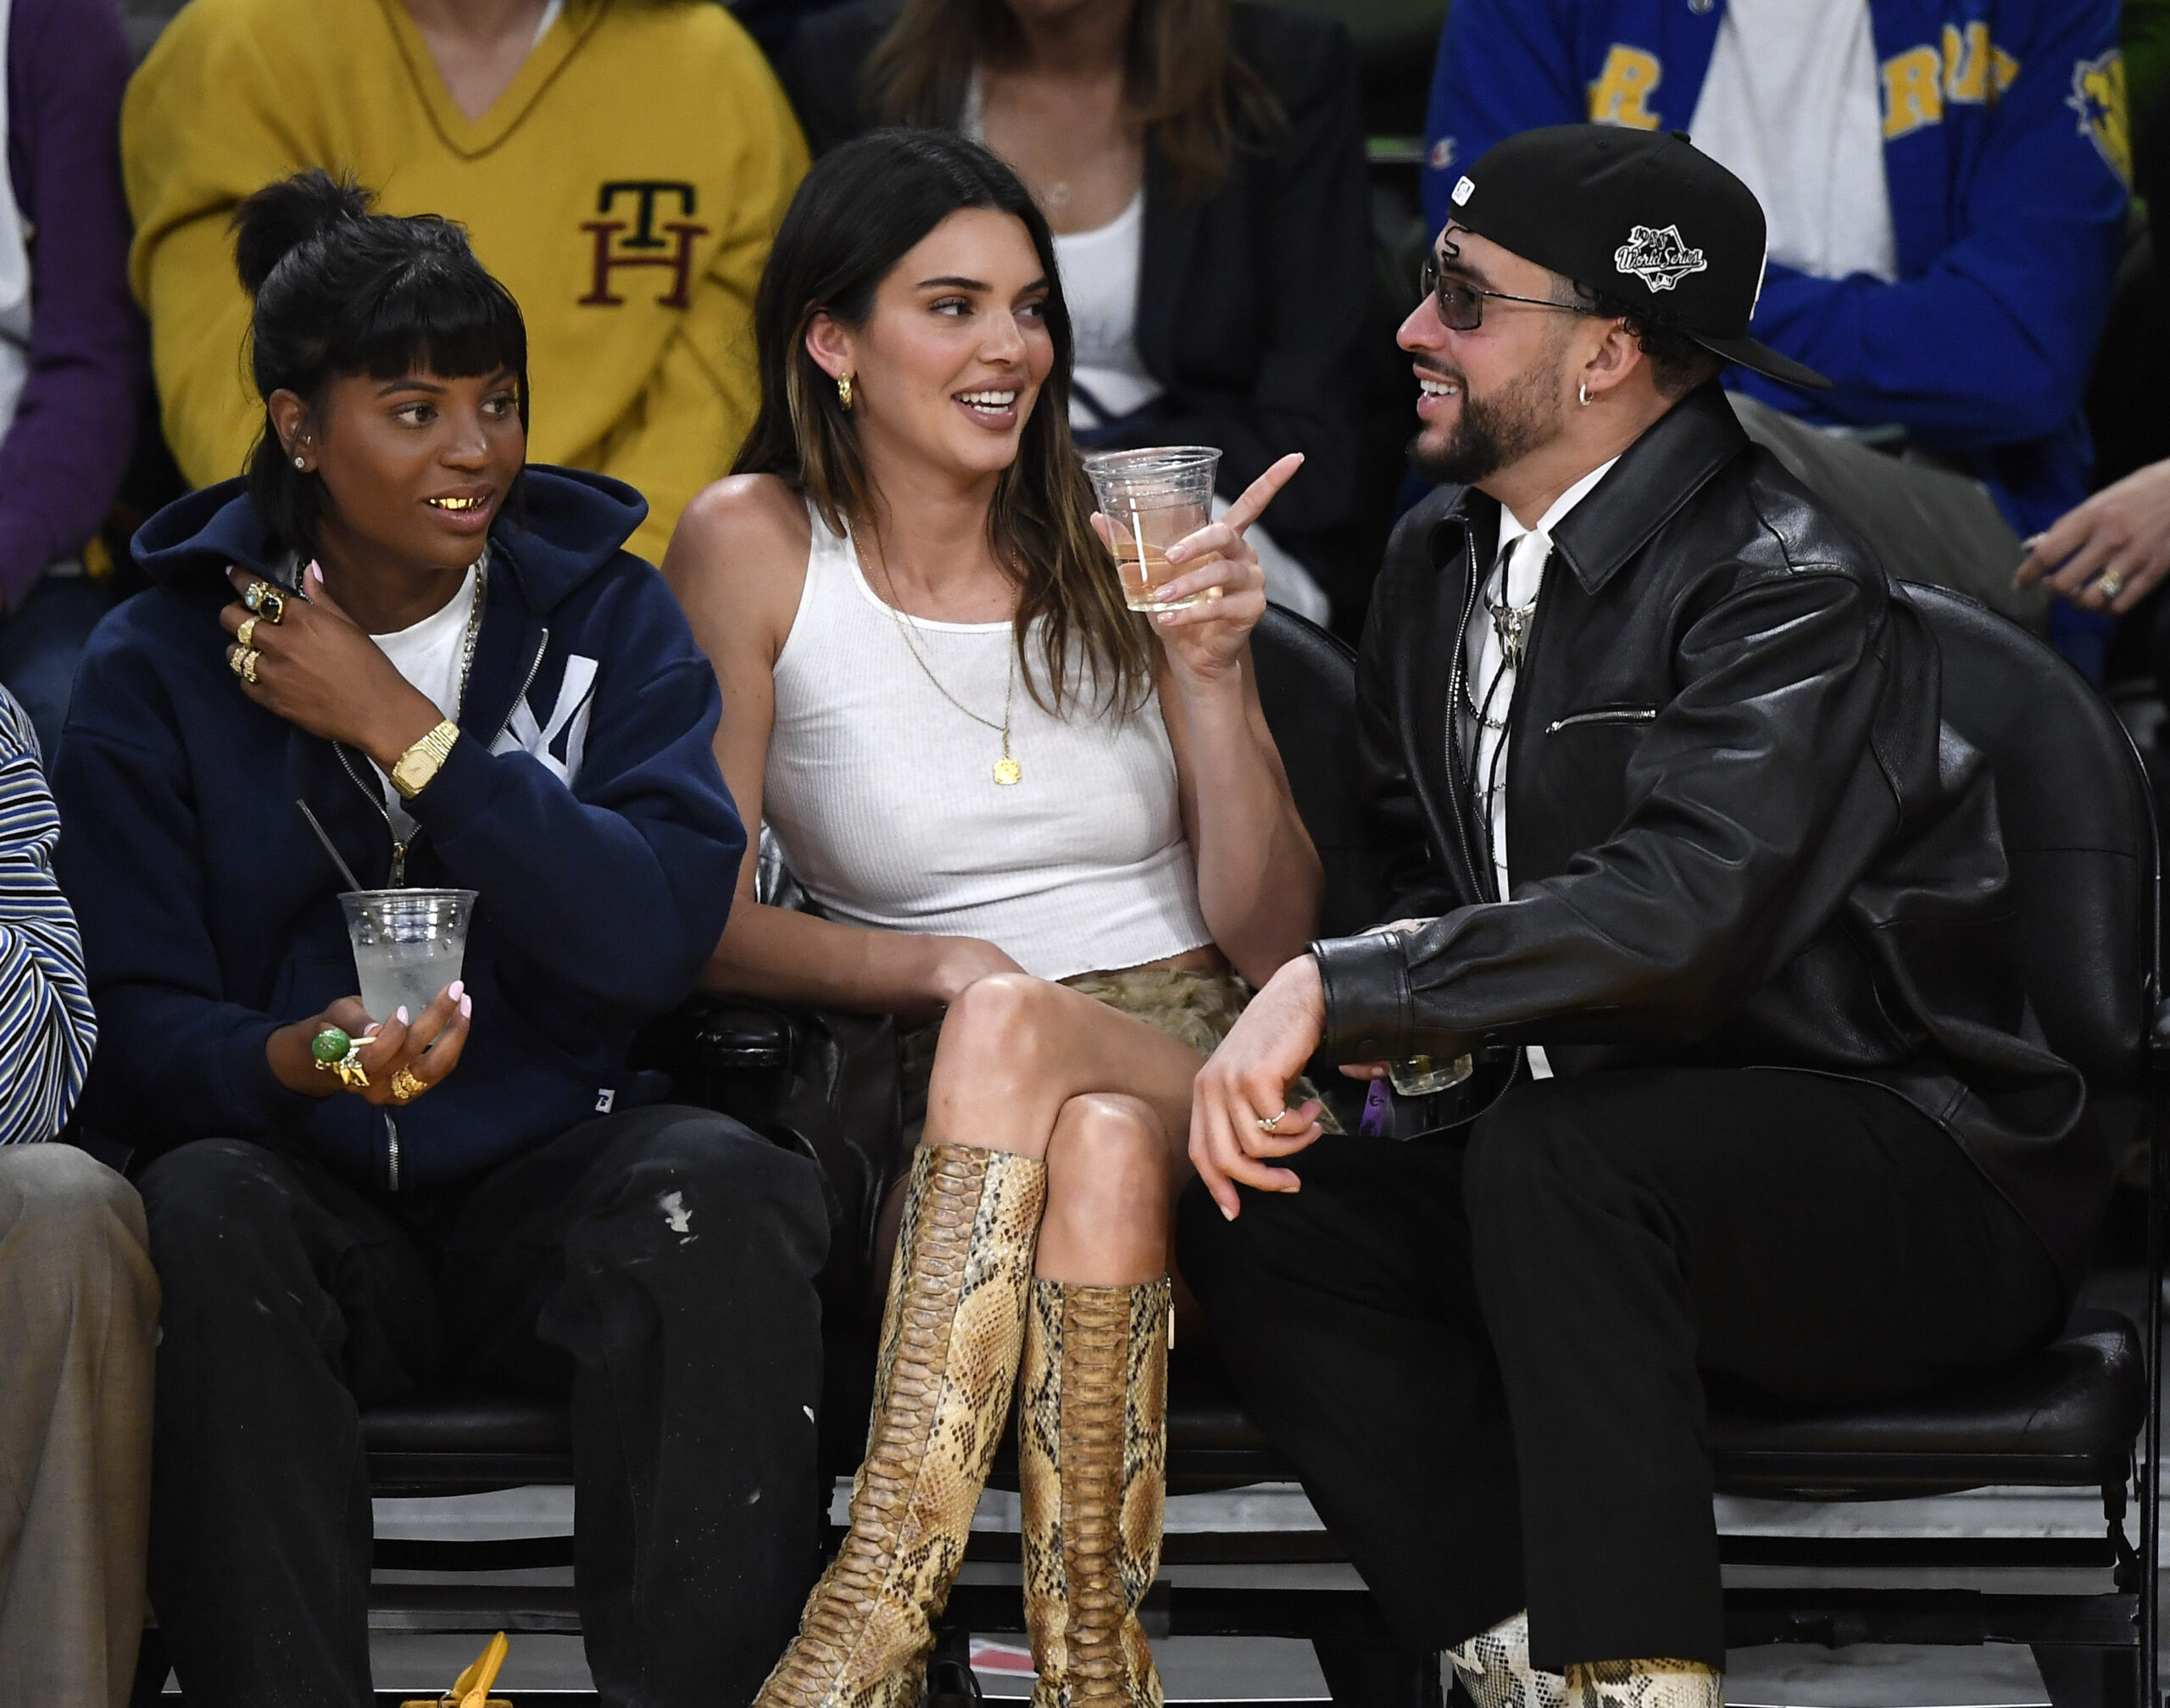 Kendall Jenner's baseball hat was the season's hottest it